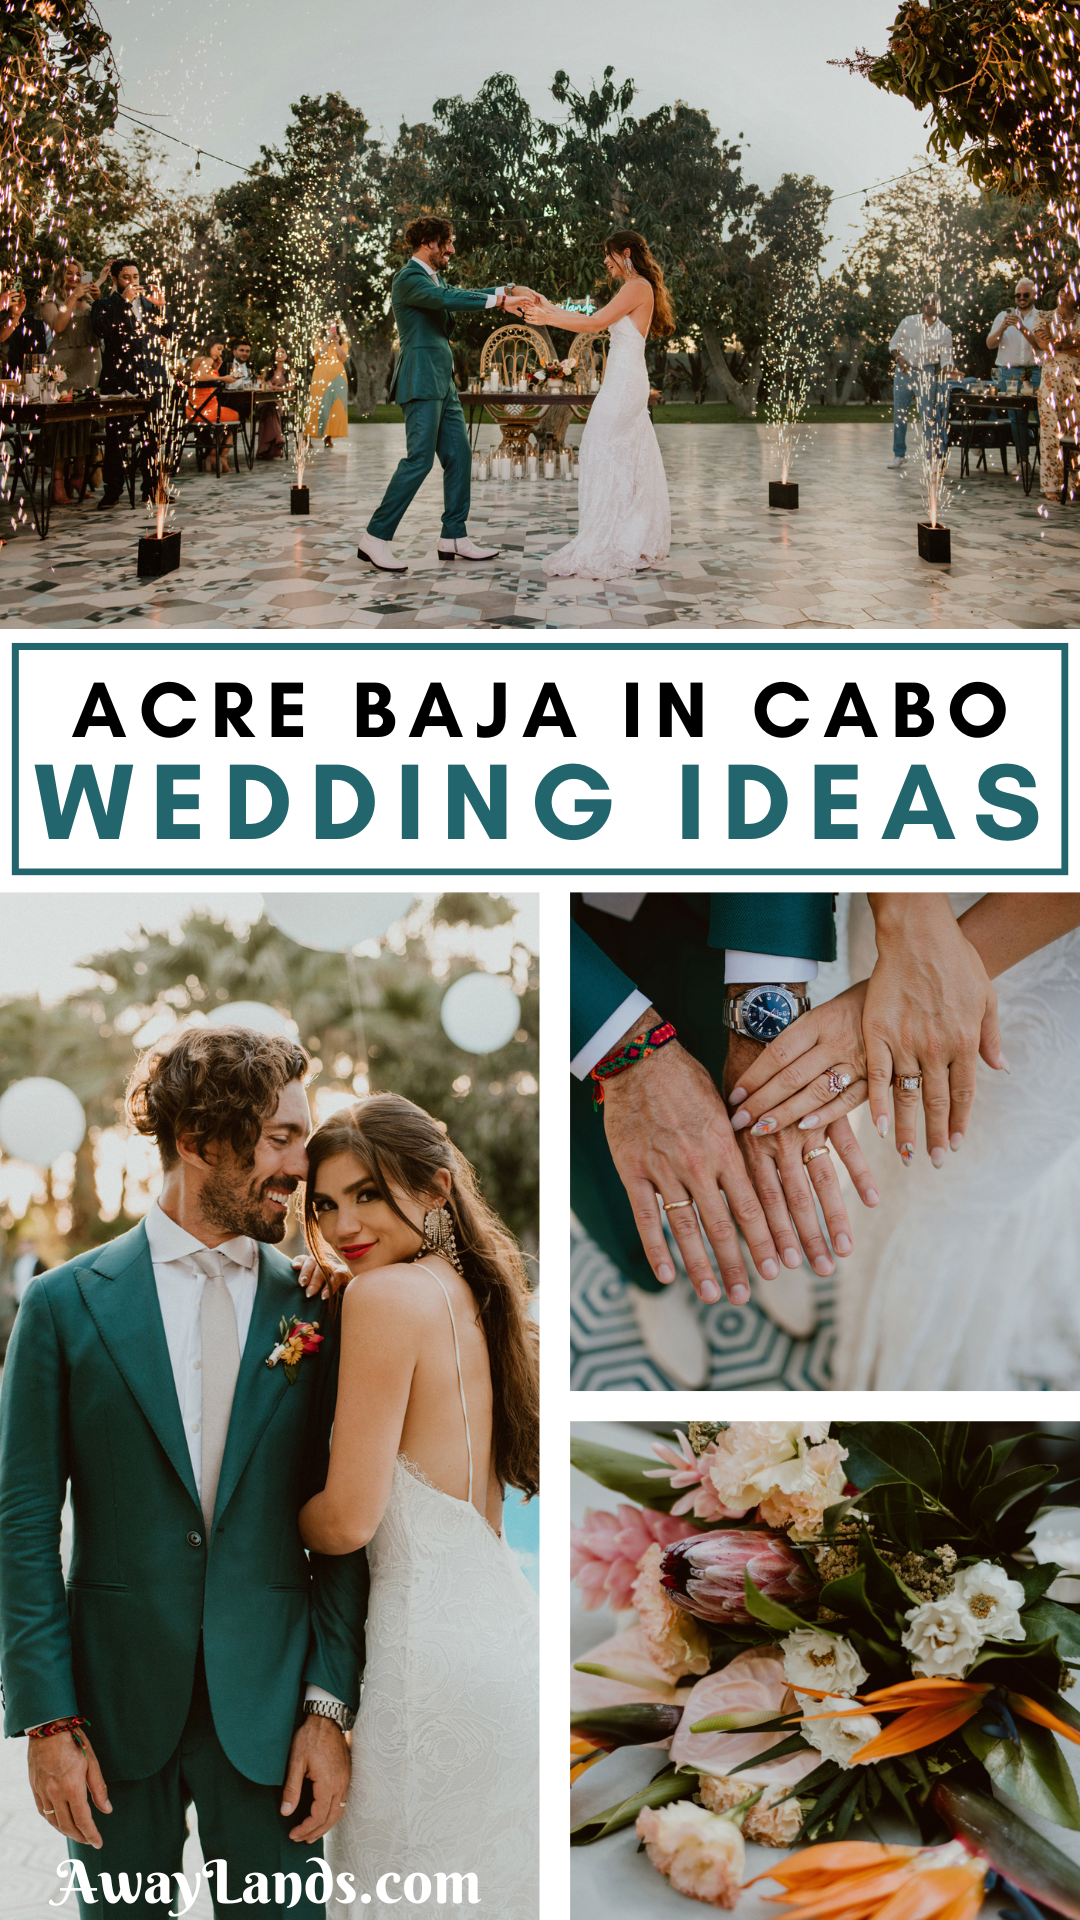 Find out all about getting married in Los Cabos Mexico with our lush Acre Baja wedding. From Cabo wedding inspiration to tips for getting married in Mexico, you'll find out why Acre Baja is one of the best places to get married in Cabo. | acre baja cabo wedding | acre baja wedding ceremony | tropical boho acre baja wedding in neutral tones | cabo wedding venues | cabo wedding ideas | cabo wedding inspiration | los cabos wedding venues | acre san jose del cabo wedding